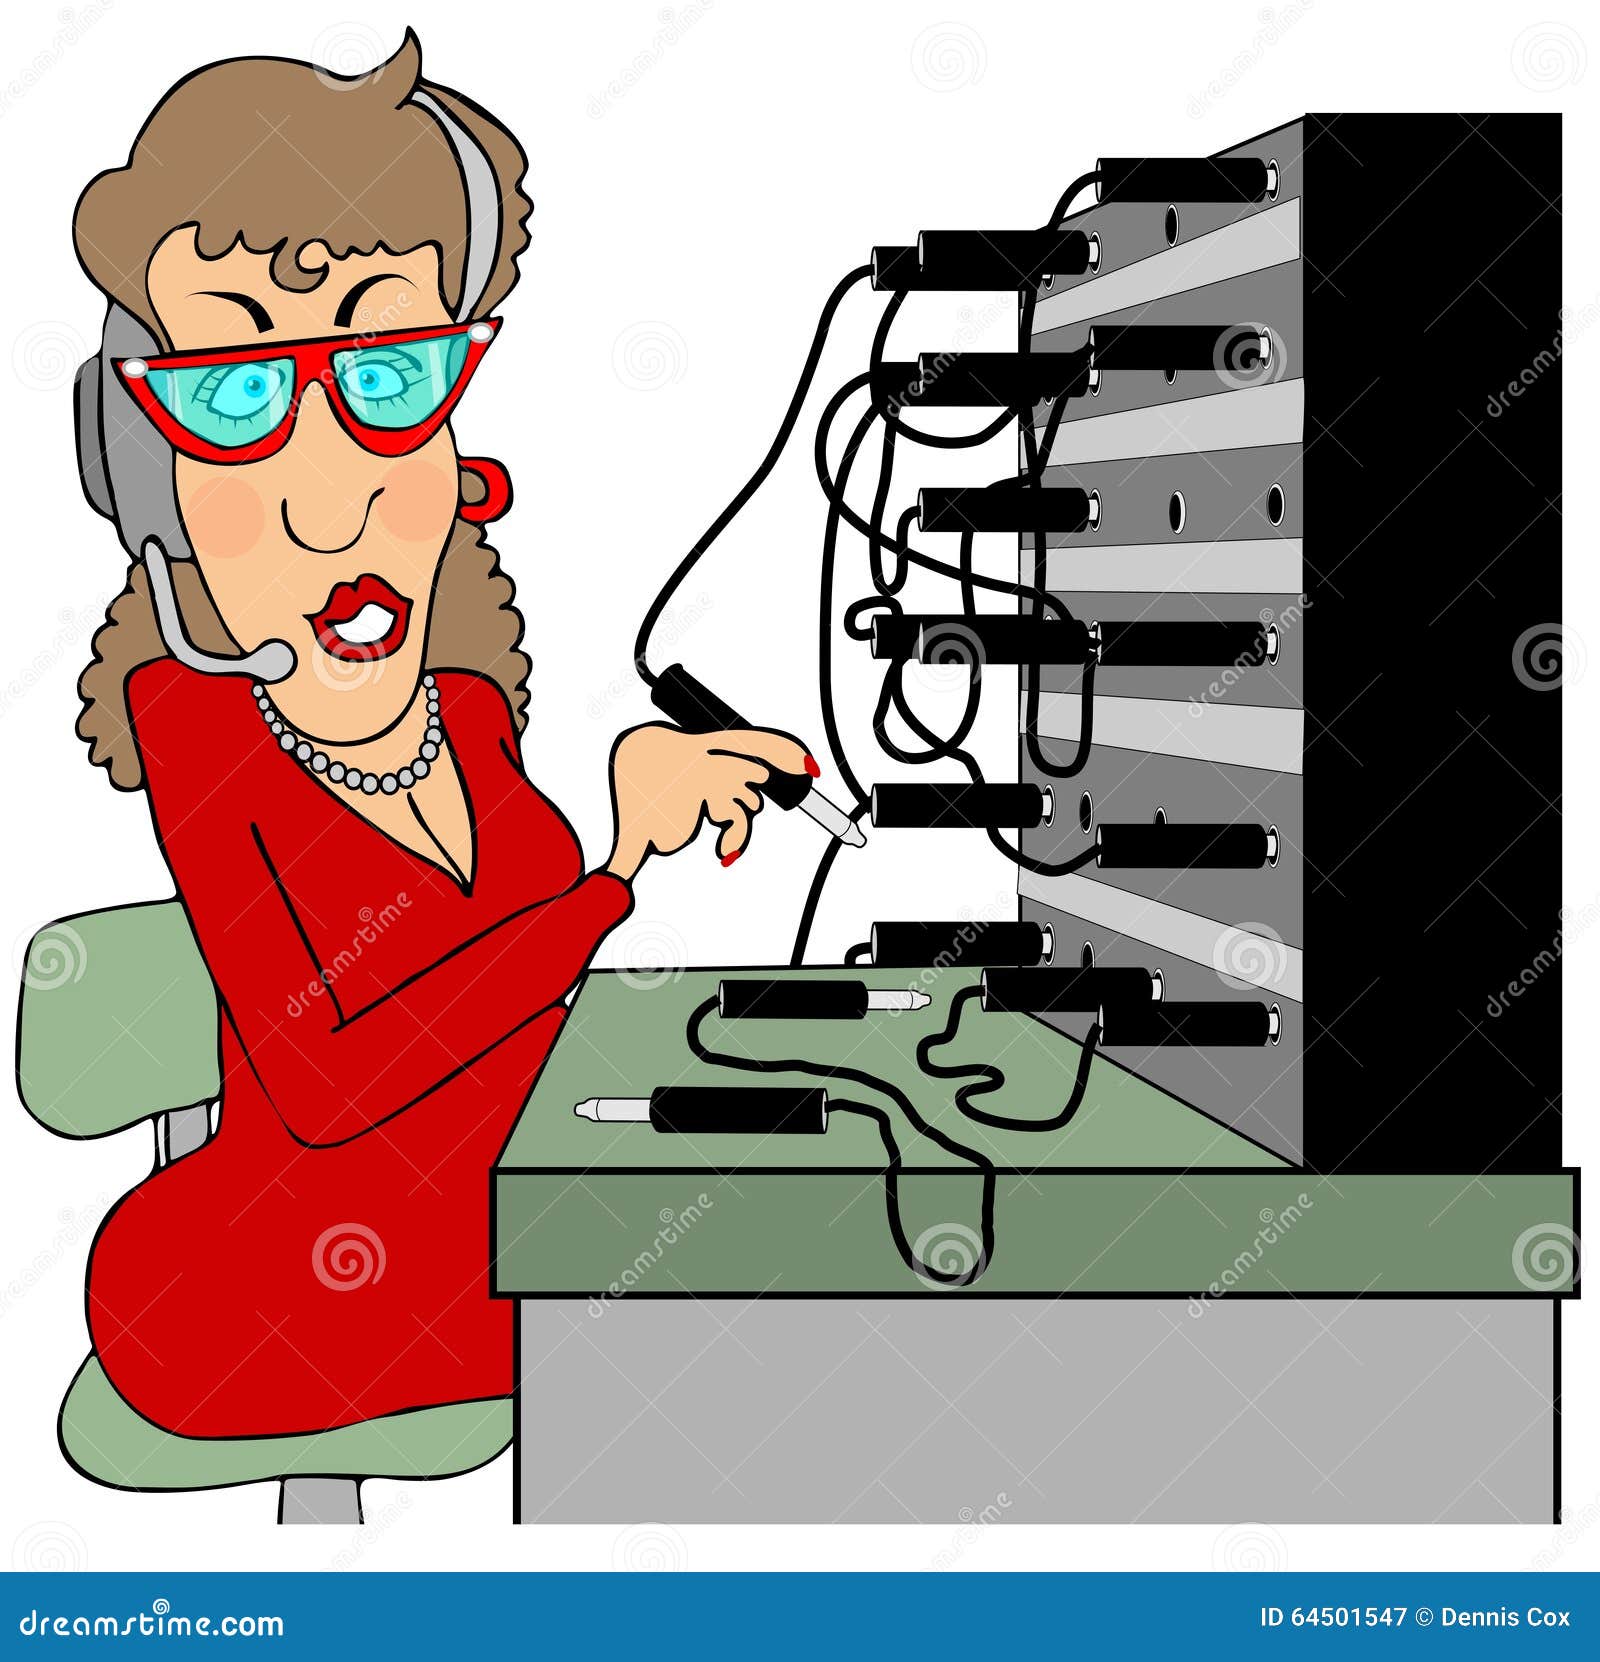 Switchboard Stock Illustrations 1 219 Switchboard Stock Illustrations Vectors Clipart Dreamstime